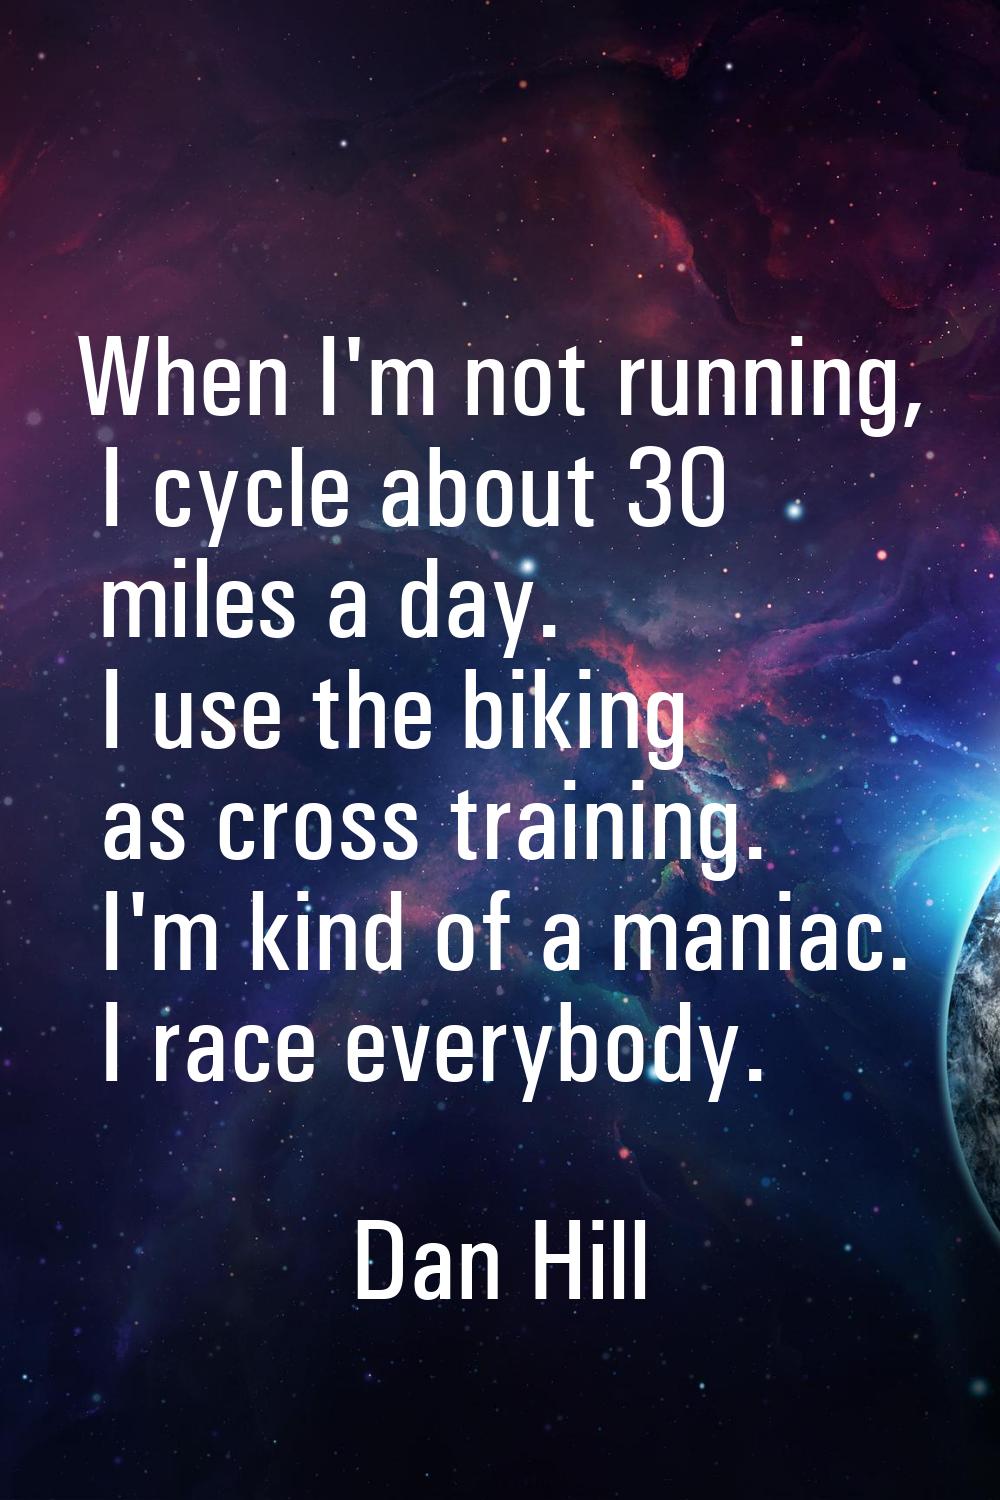 When I'm not running, I cycle about 30 miles a day. I use the biking as cross training. I'm kind of